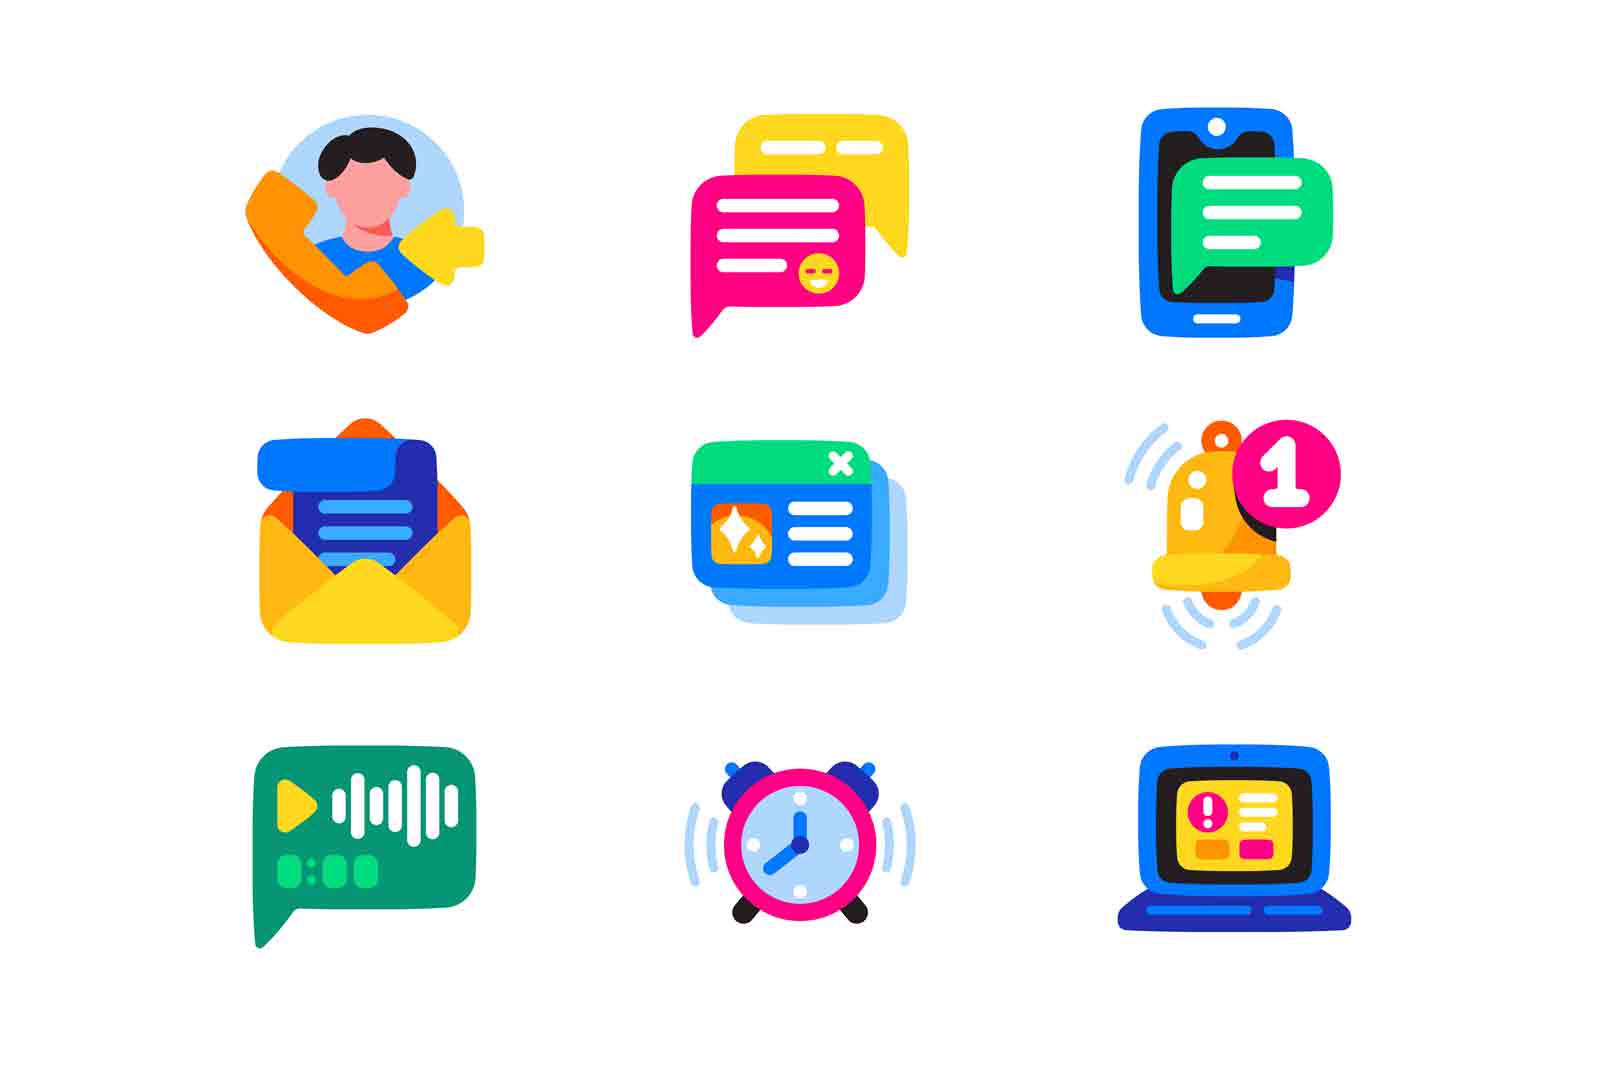 Correspondence notifications icons set vector illustration. New email message notice, open mail envelope letter and internet reminders